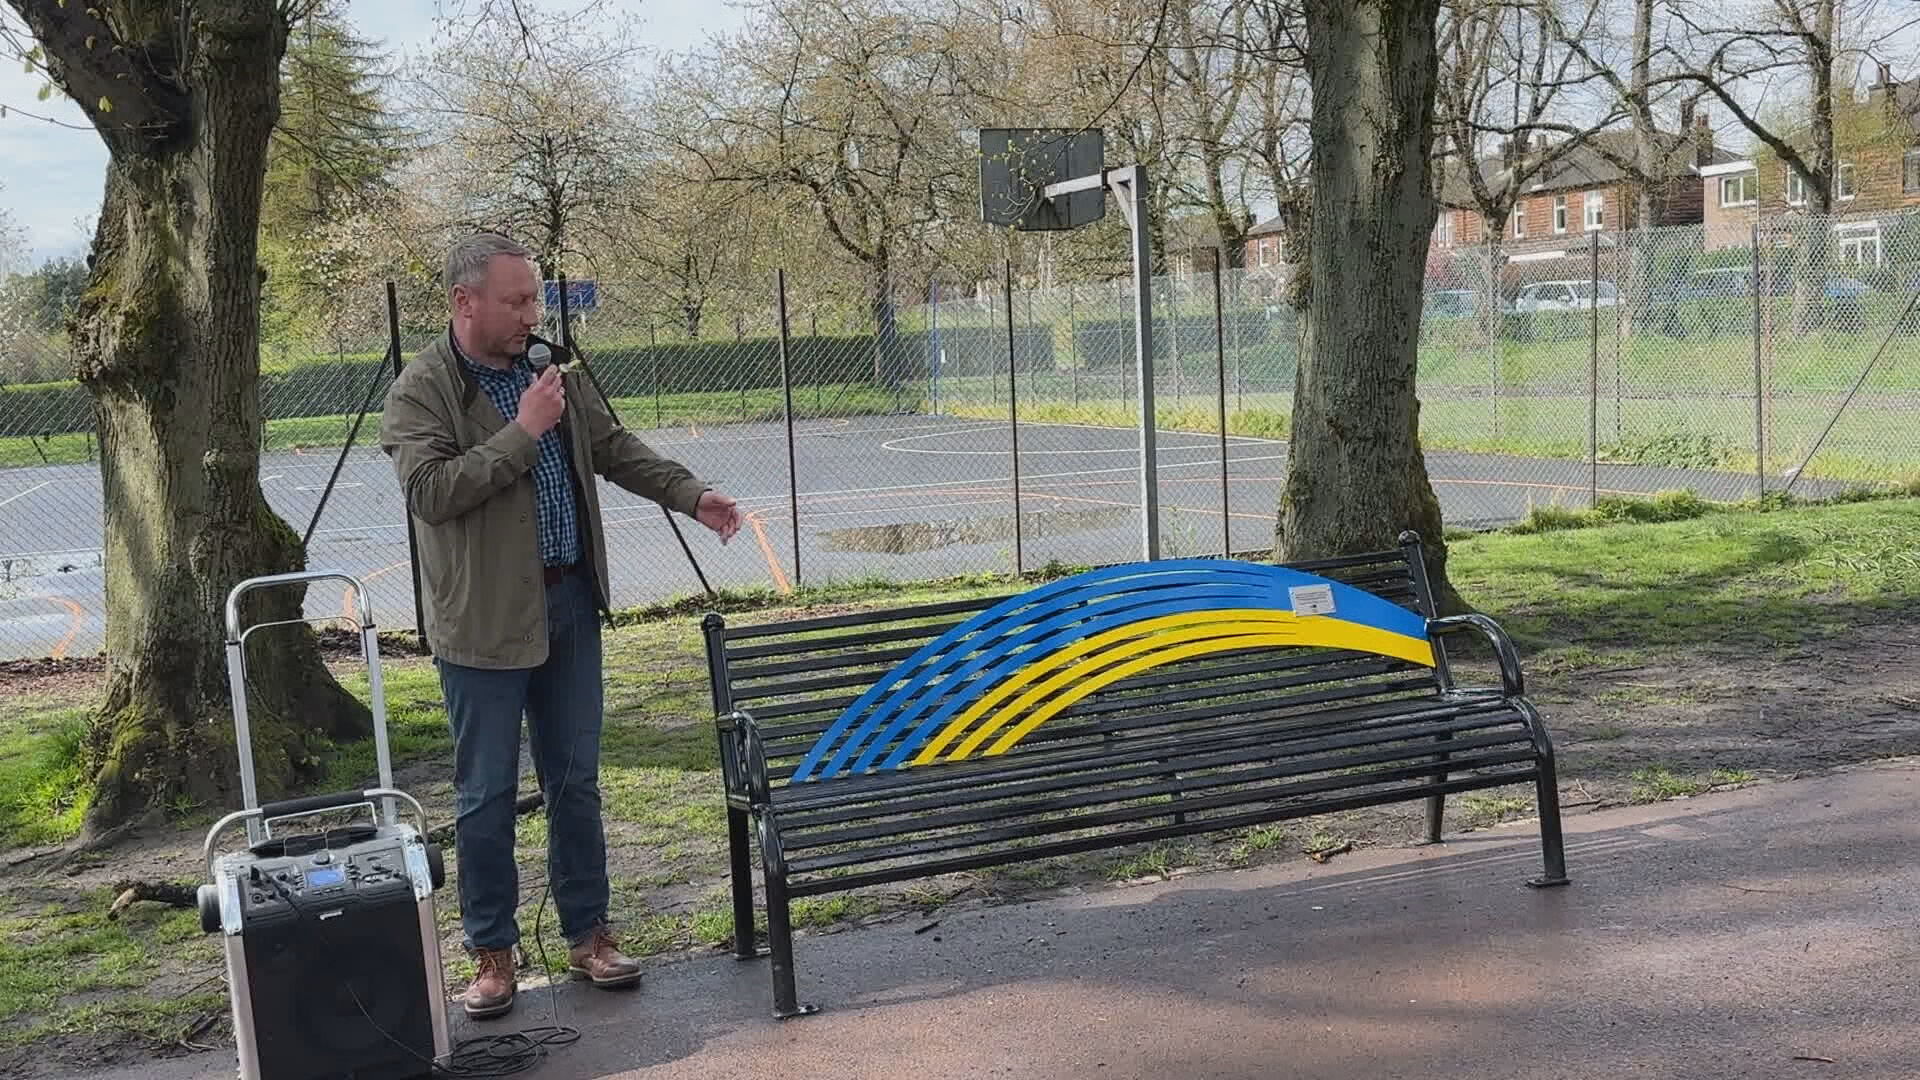 A memorial bench has been unveiled in Glasgow for those affected by the conflict. 